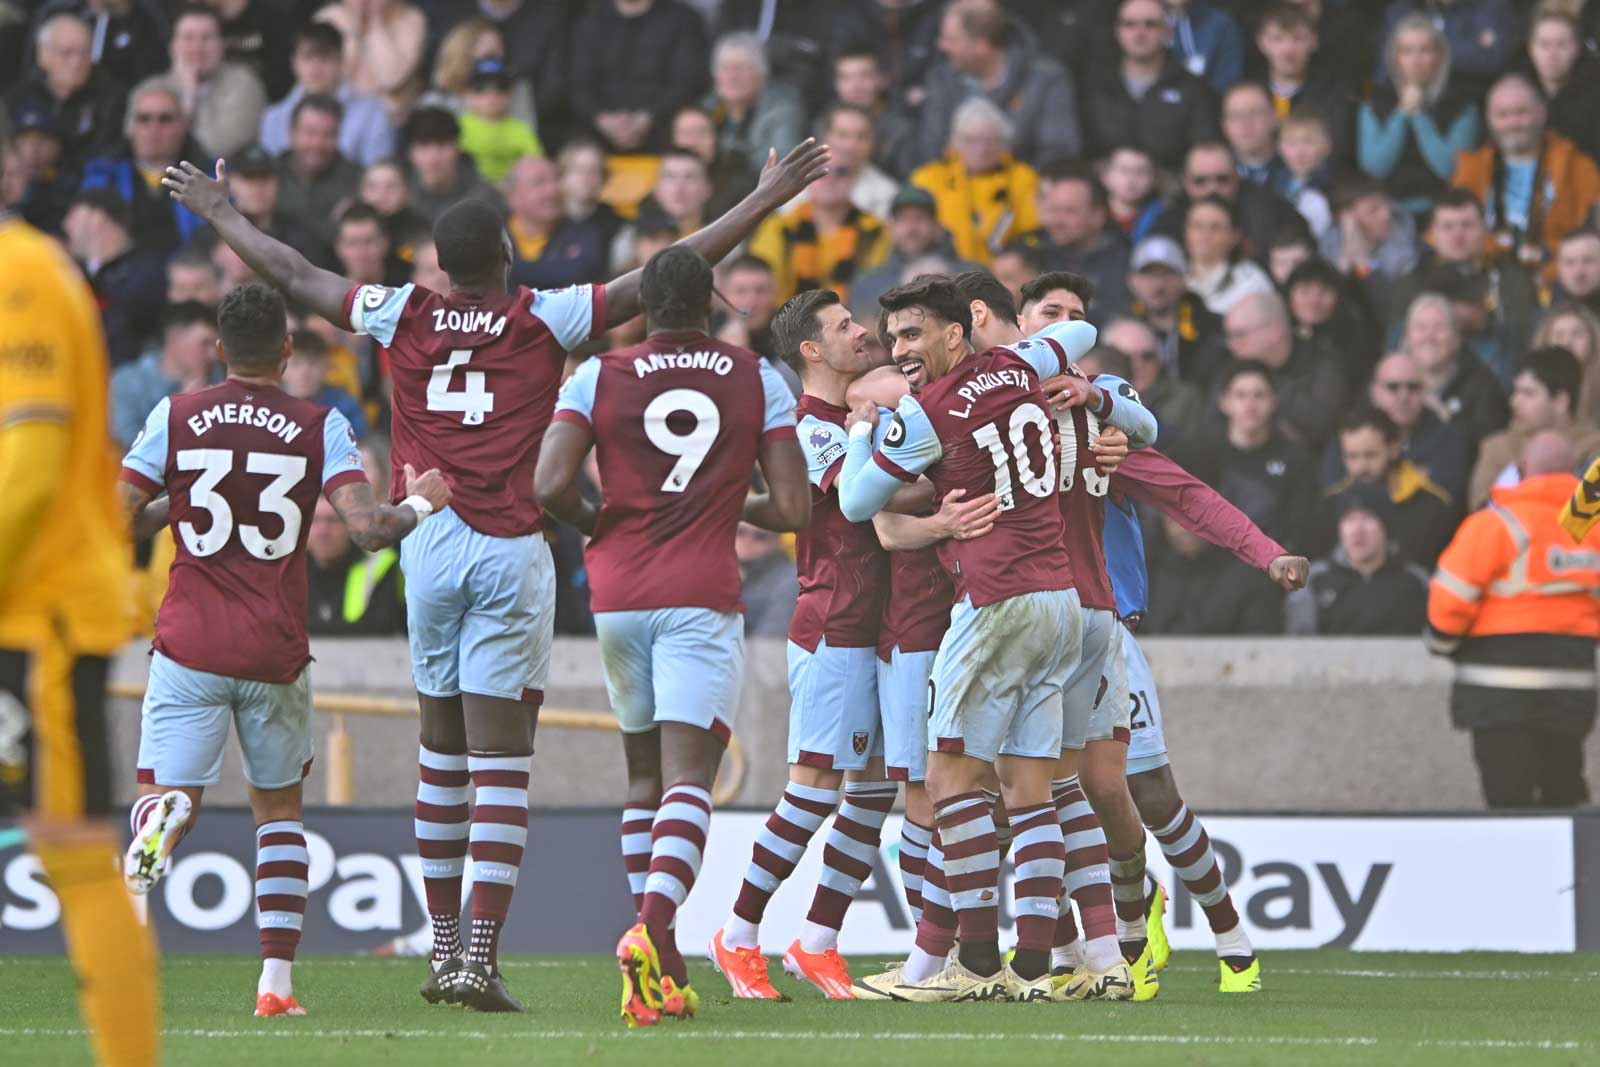 The Hammers players celebrate their winning goal at Wolves